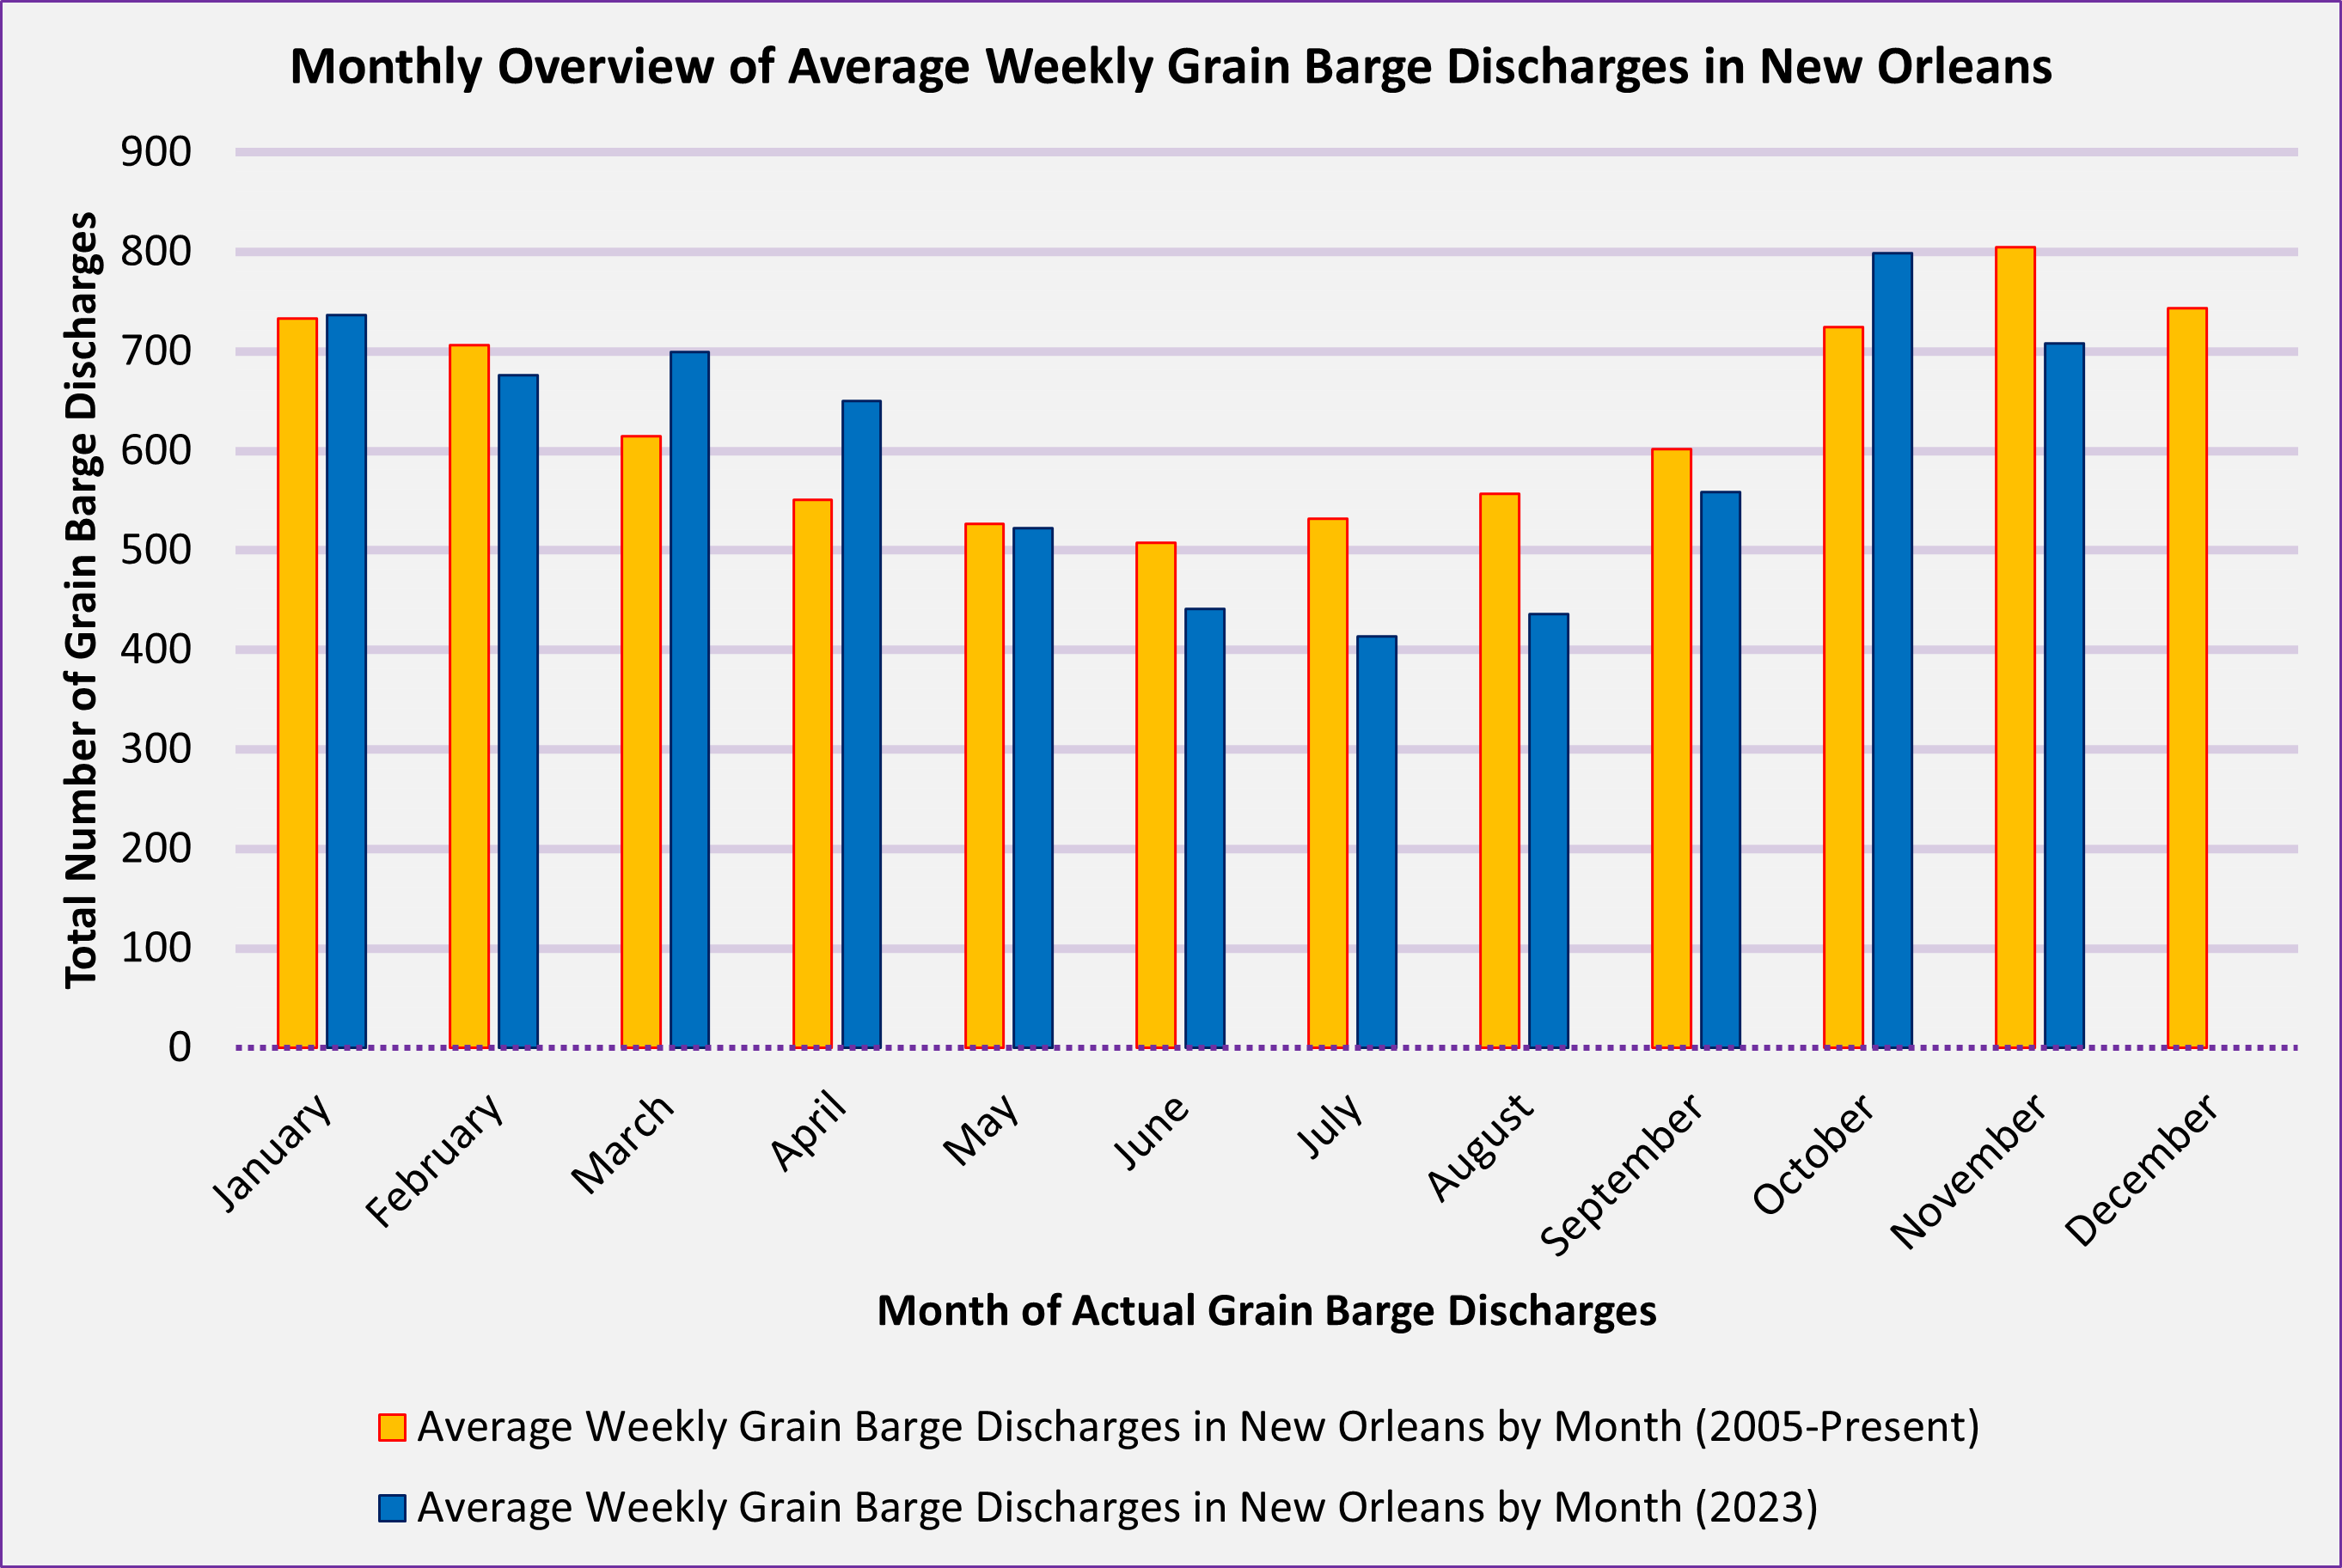 Monthly Overview of Average Weekly Grain Barge Discharges in New Orleans